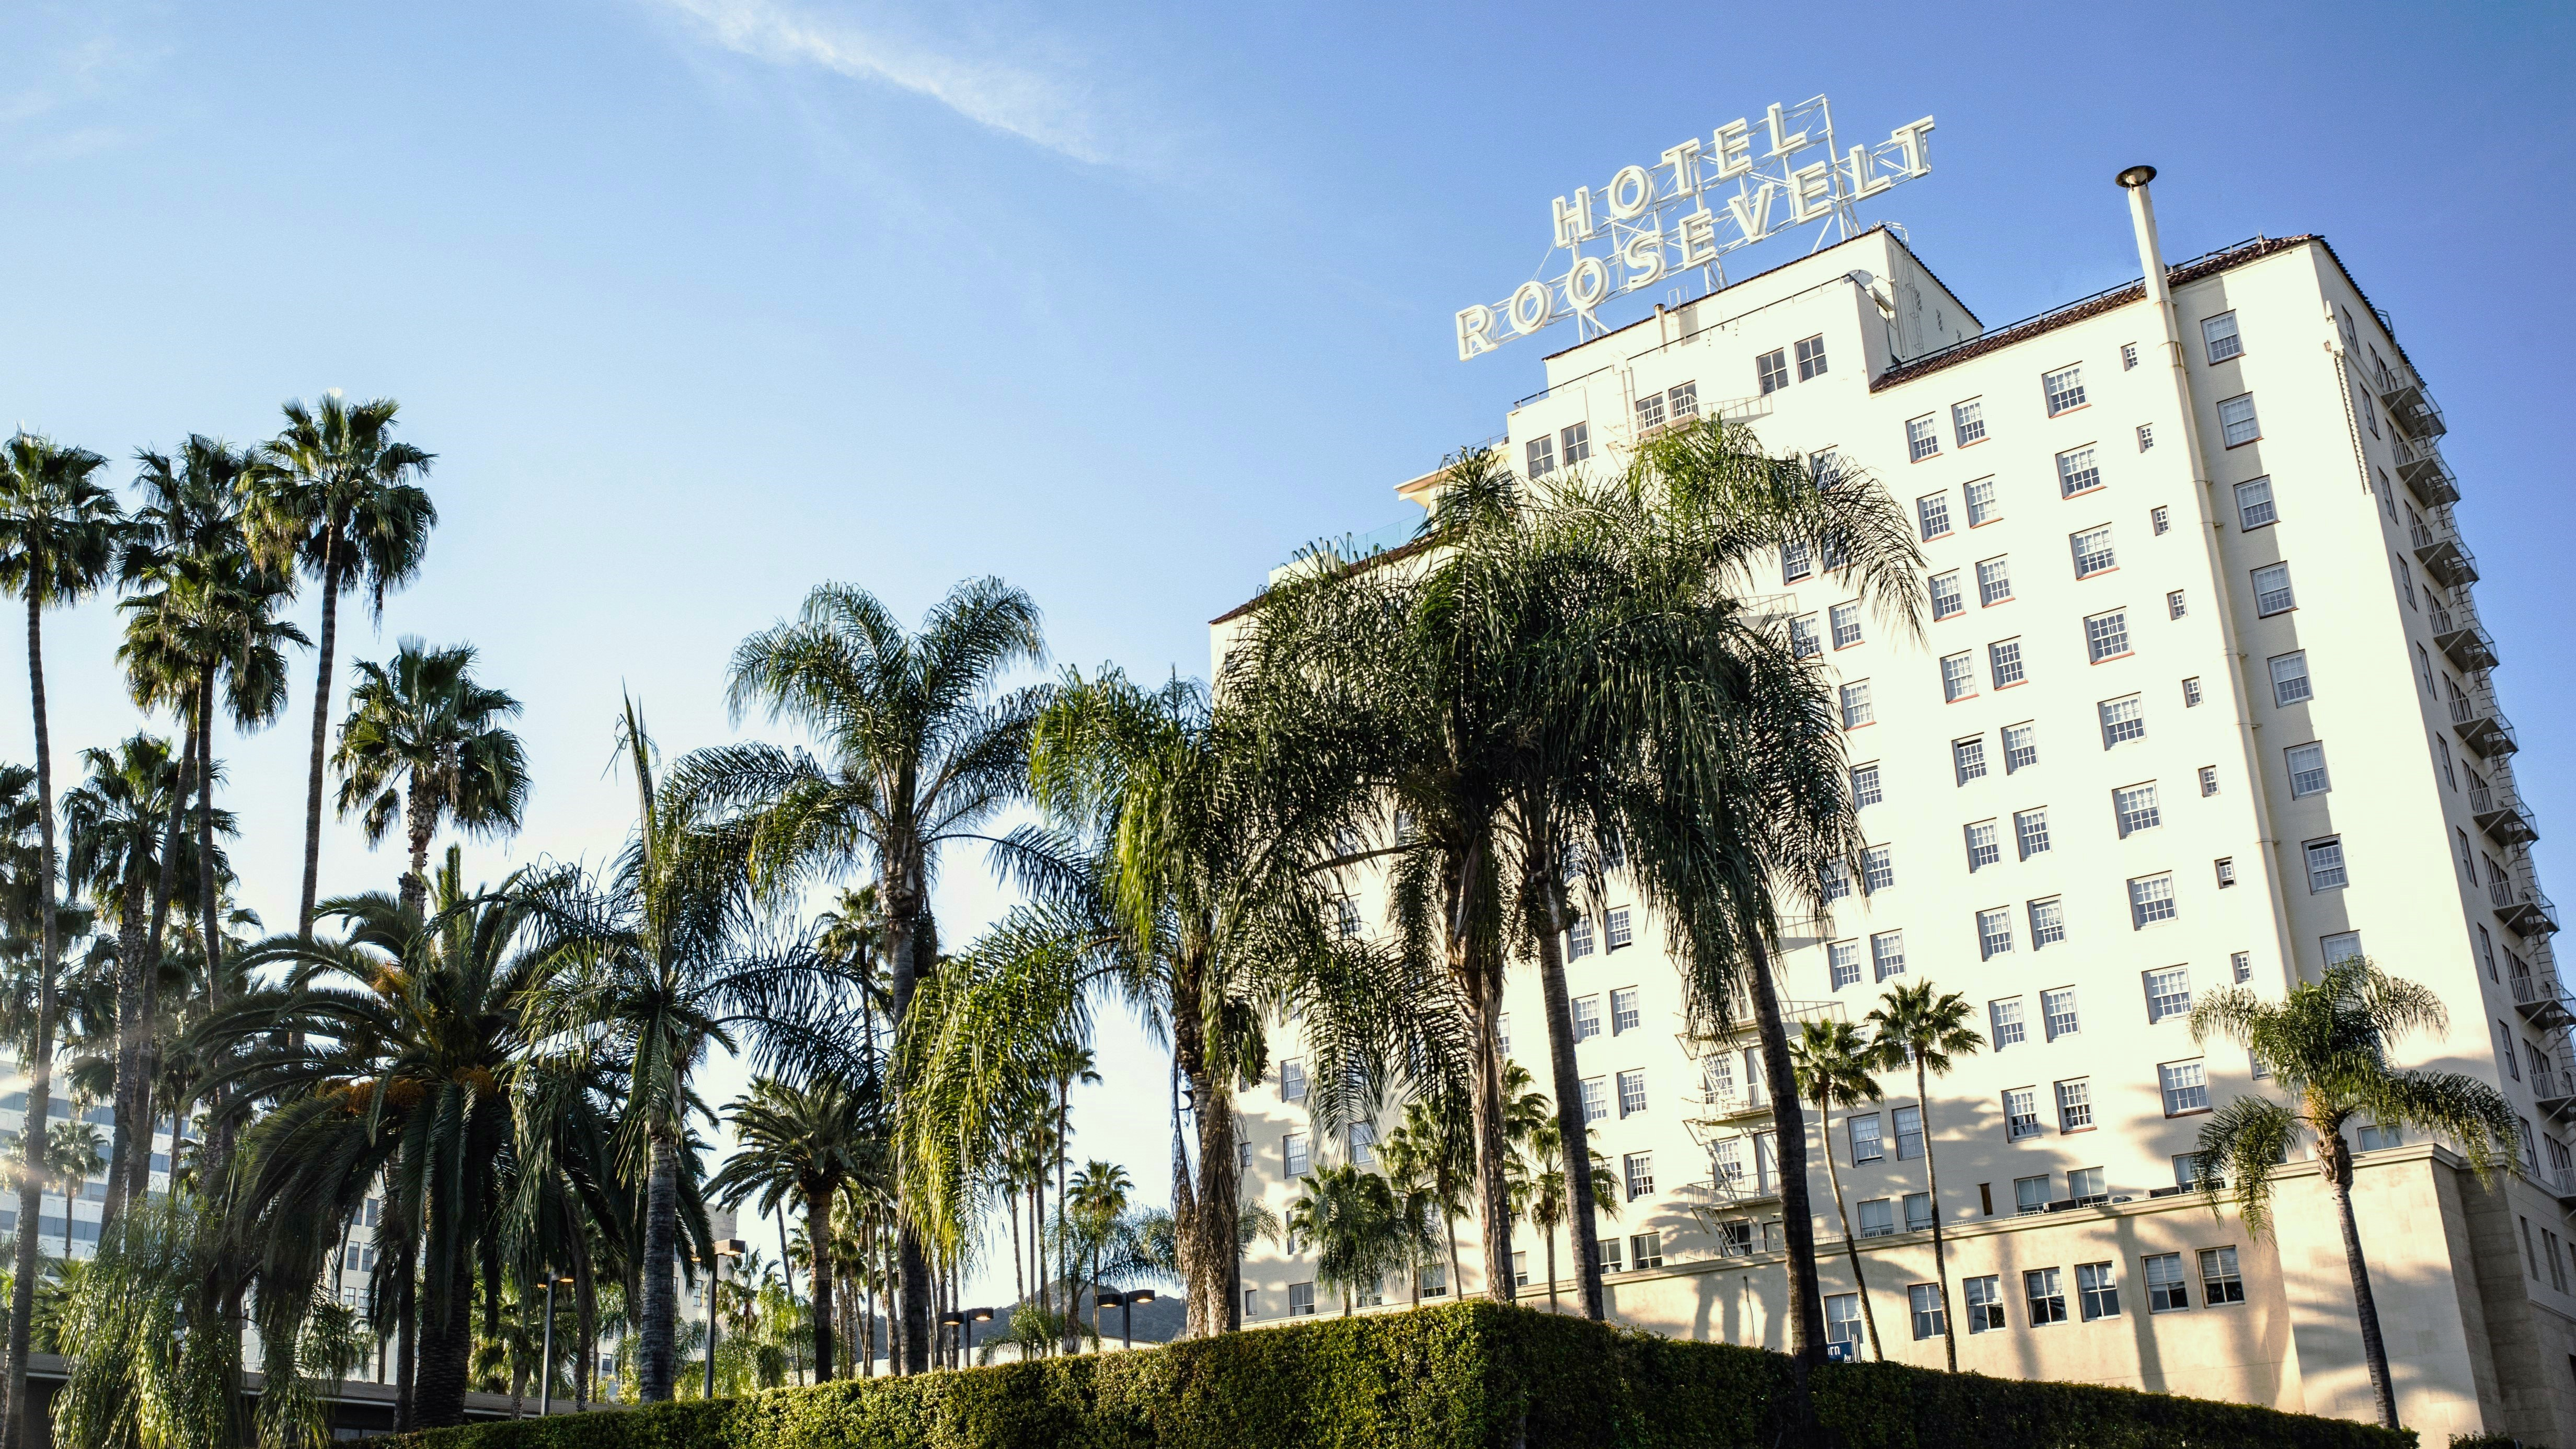 The 2023 Top 25 Historic Hotels of America in Film & Television